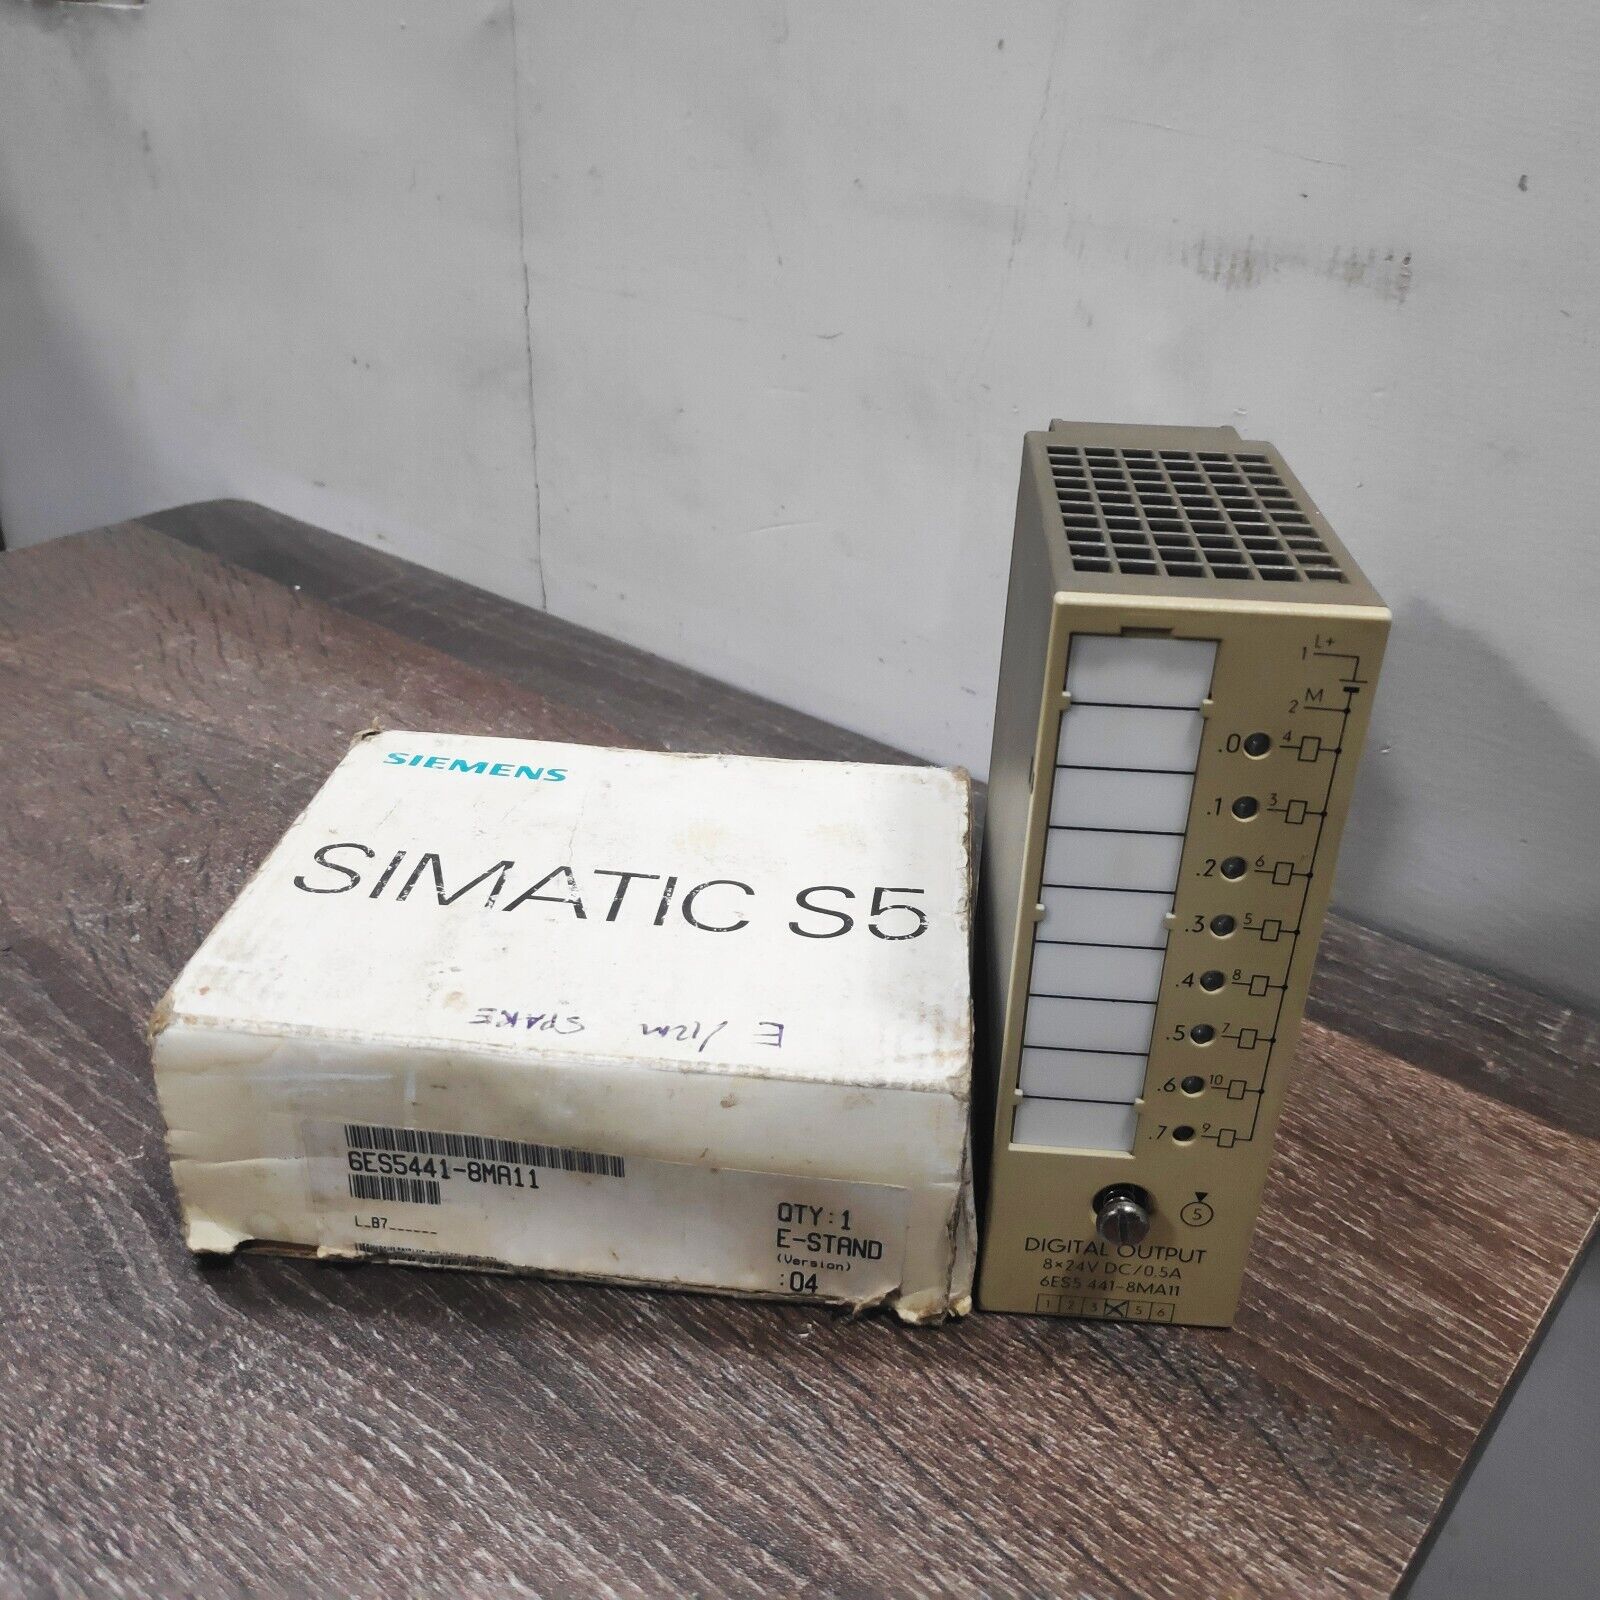 SIEMENS 6ES5441-8MA11 DIGITAL OUTPUT MODULE SIMATIC-S5 NON-ISOLATED 8-OUTPUT 0.5AMP 24VDC